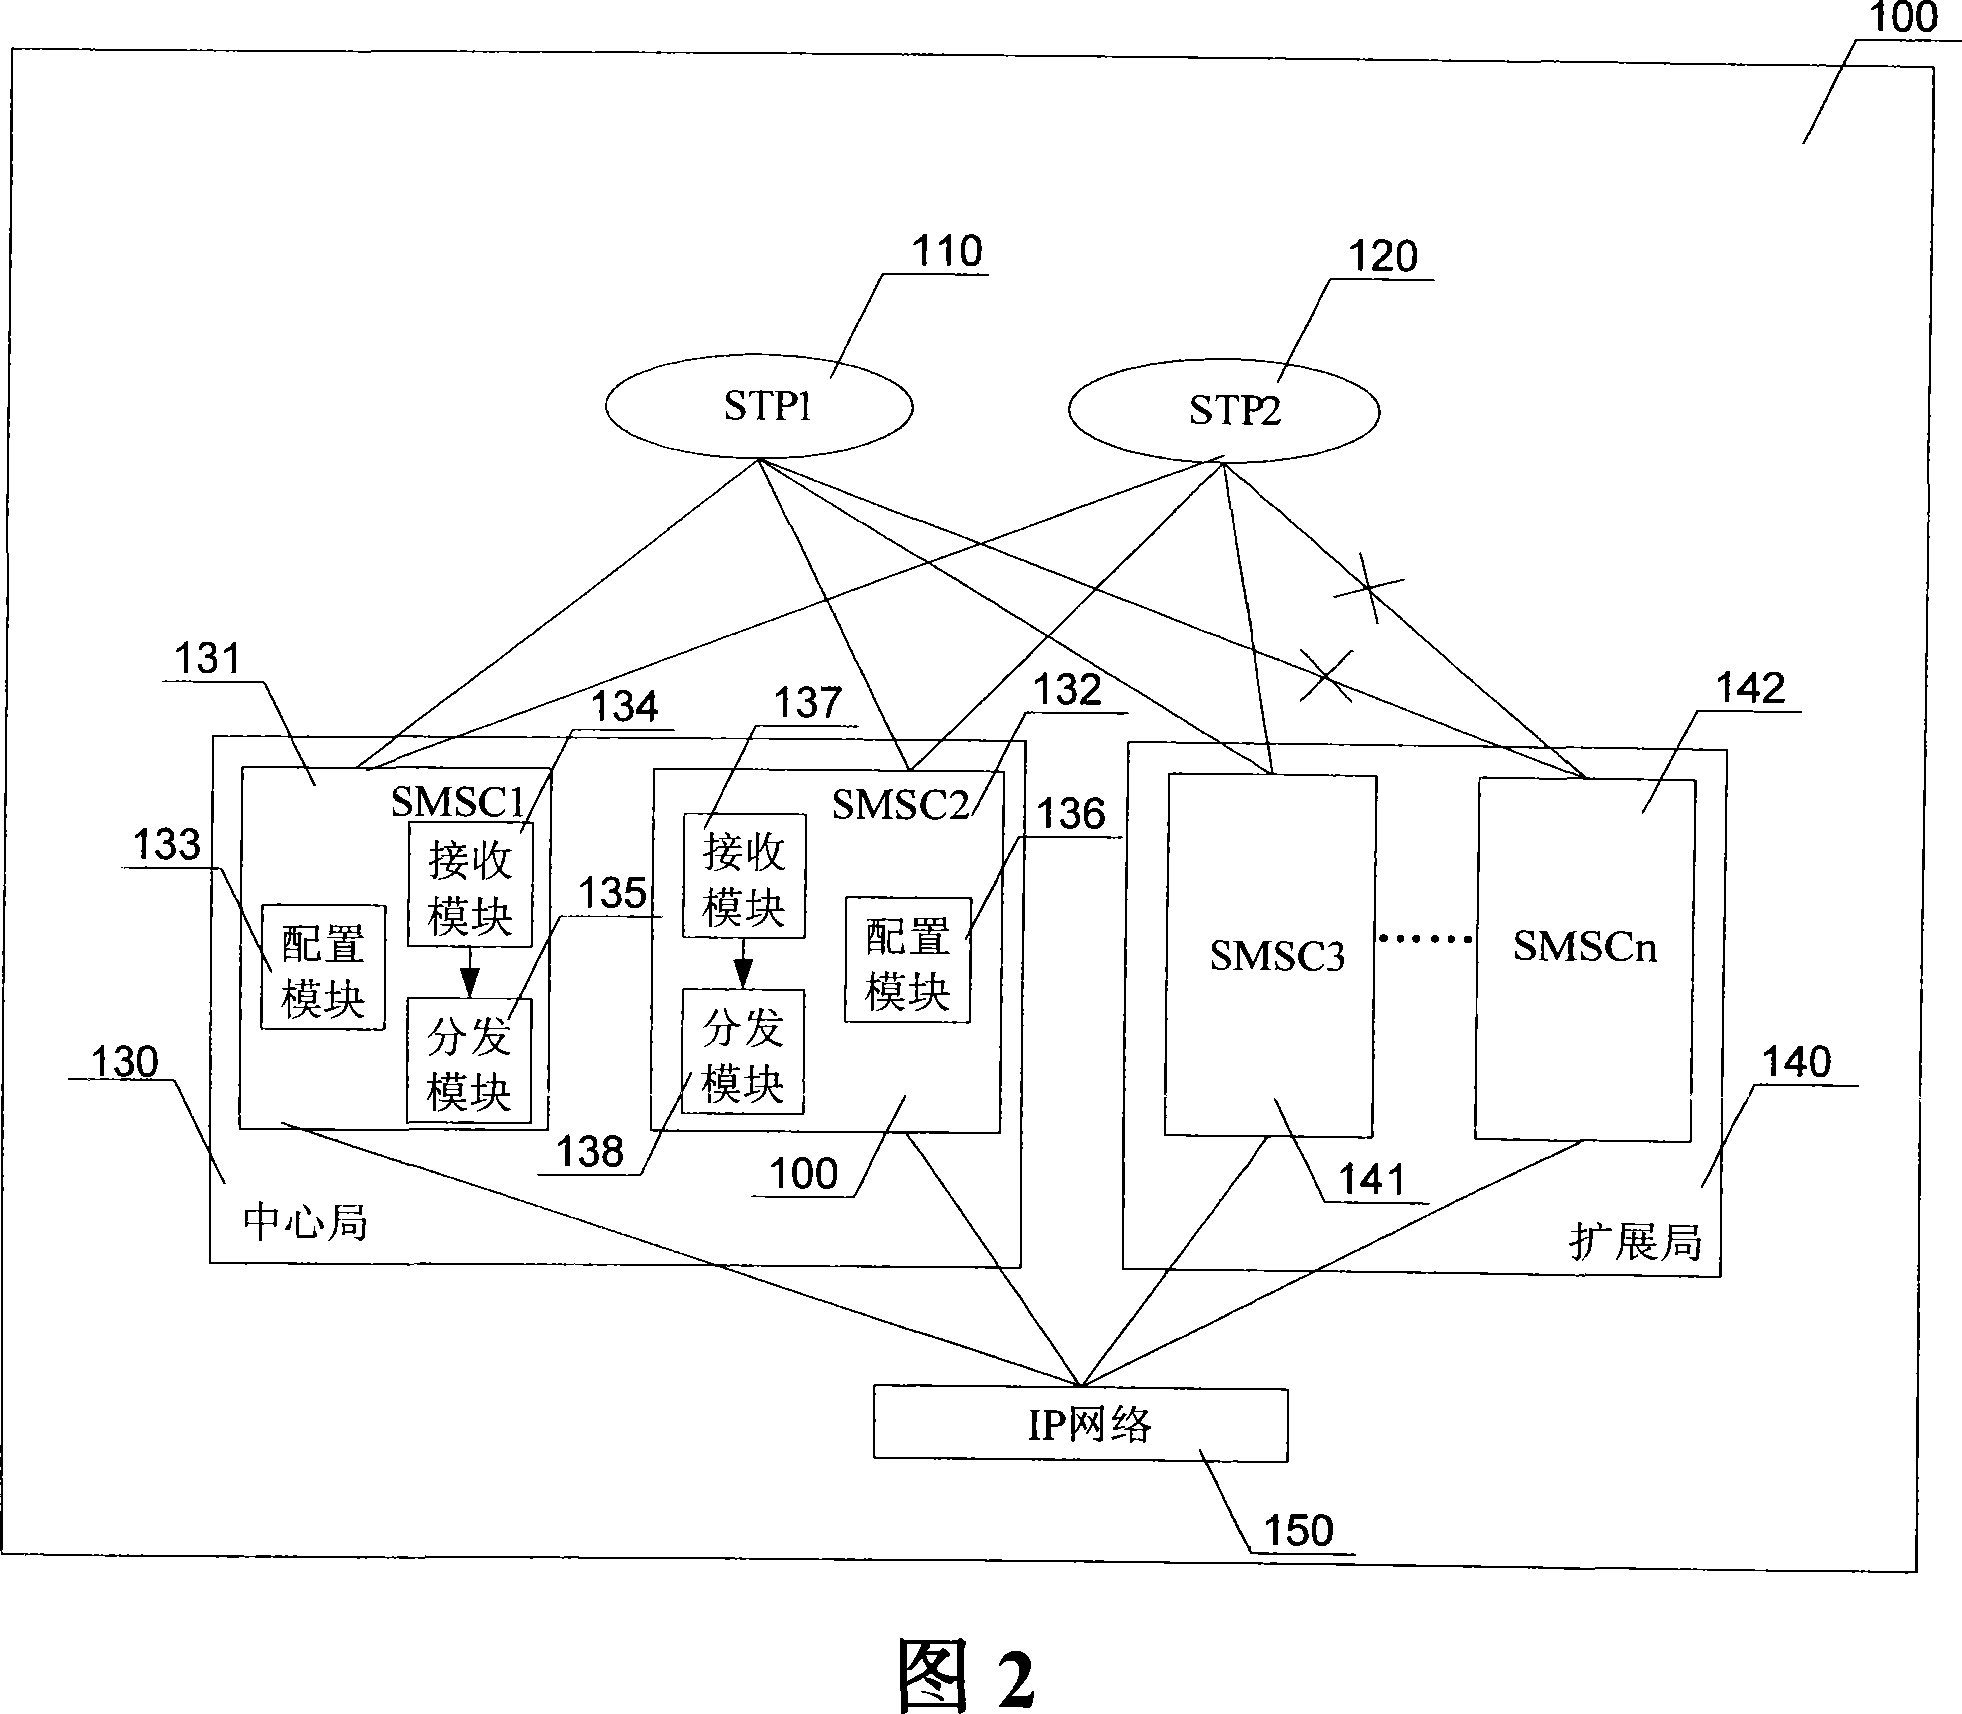 Short message center tolerance disaster distributary processing system and method